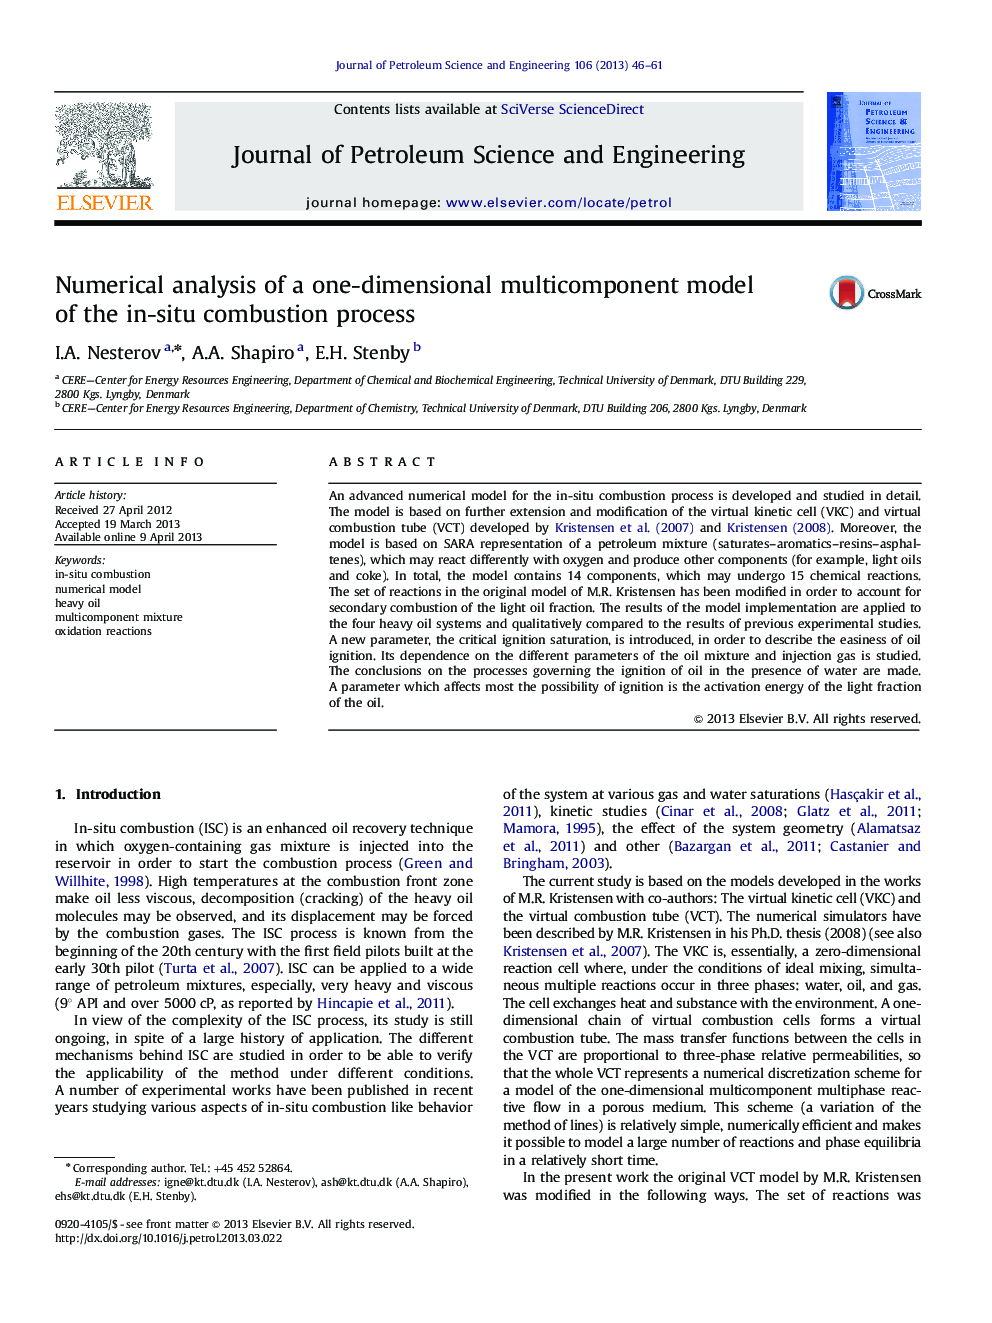 Numerical analysis of a one-dimensional multicomponent model of the in-situ combustion process